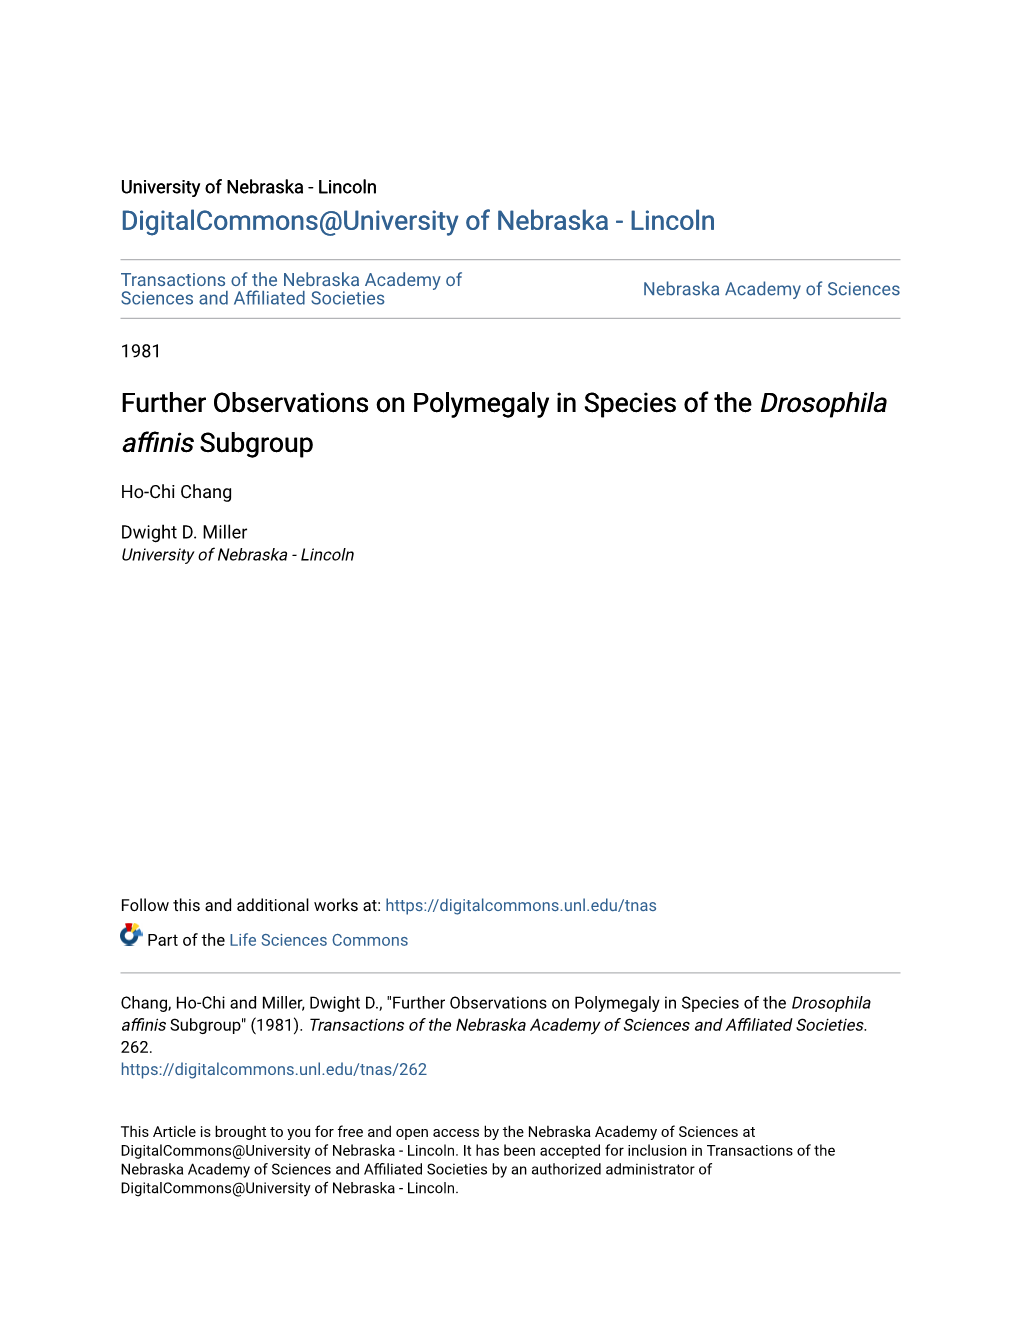 Further Observations on Polymegaly in Species of the Drosophila Affinis Subgroup